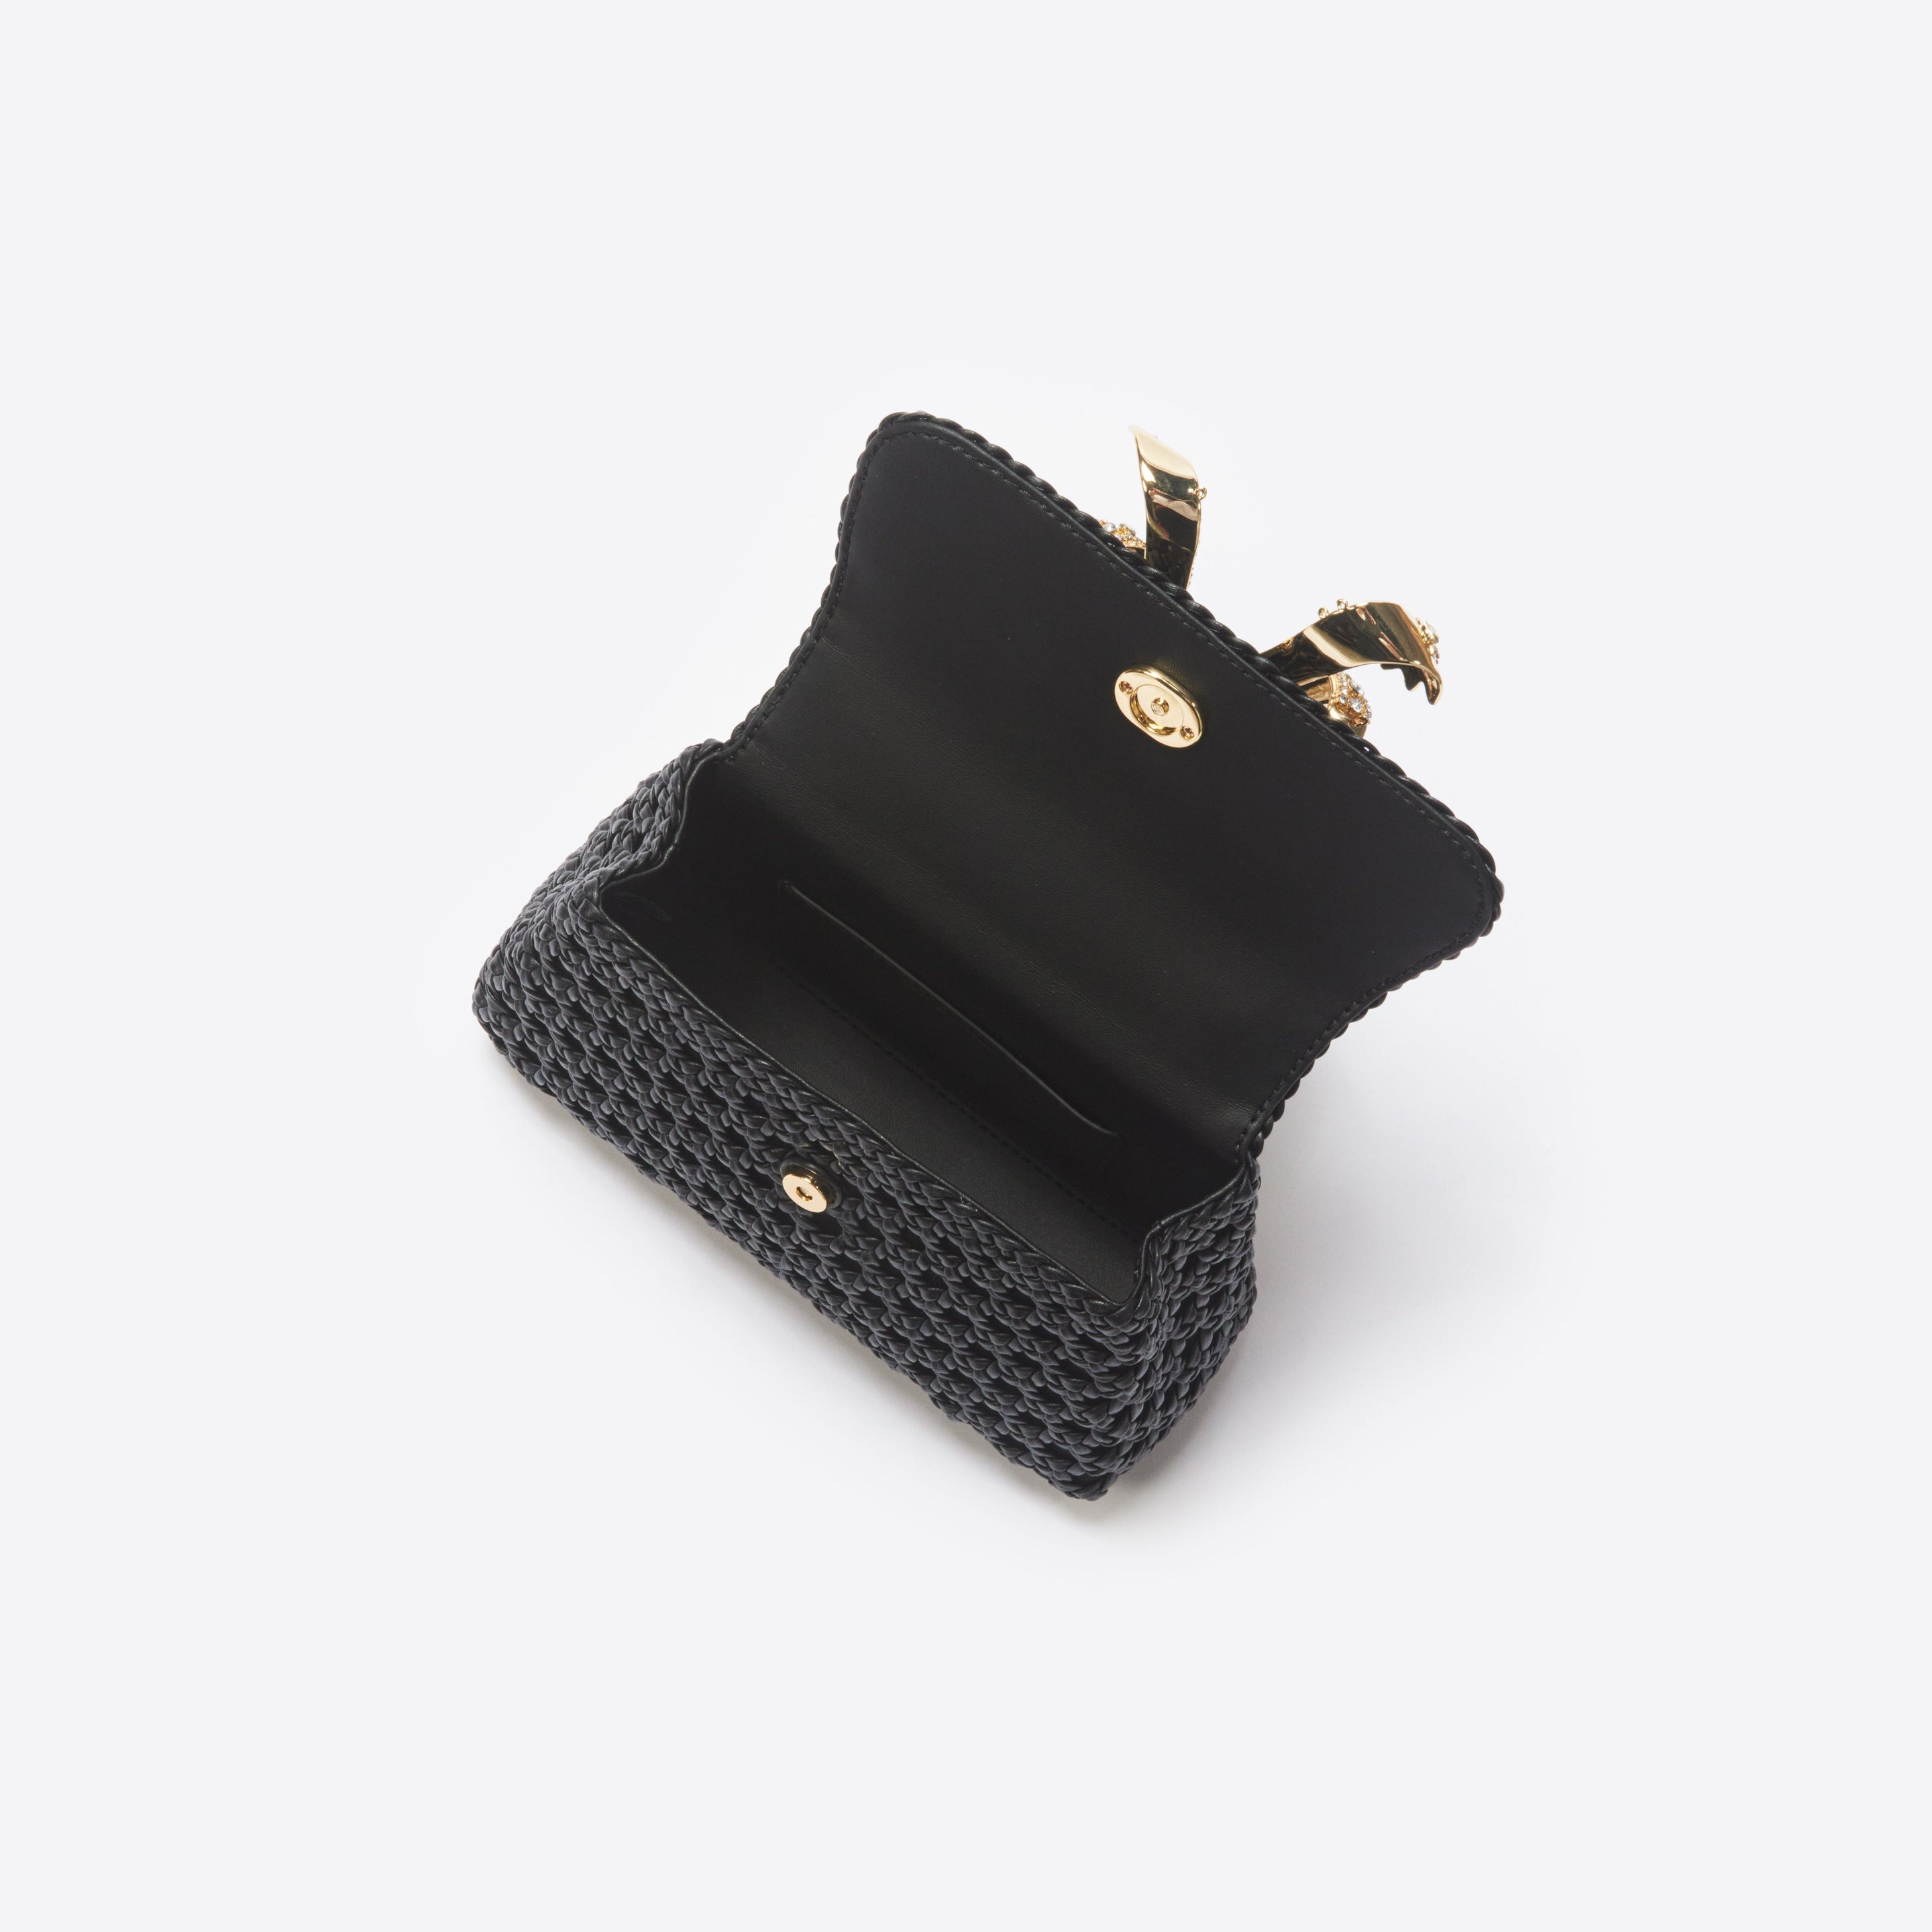 Black Woven Leather Bag - 4